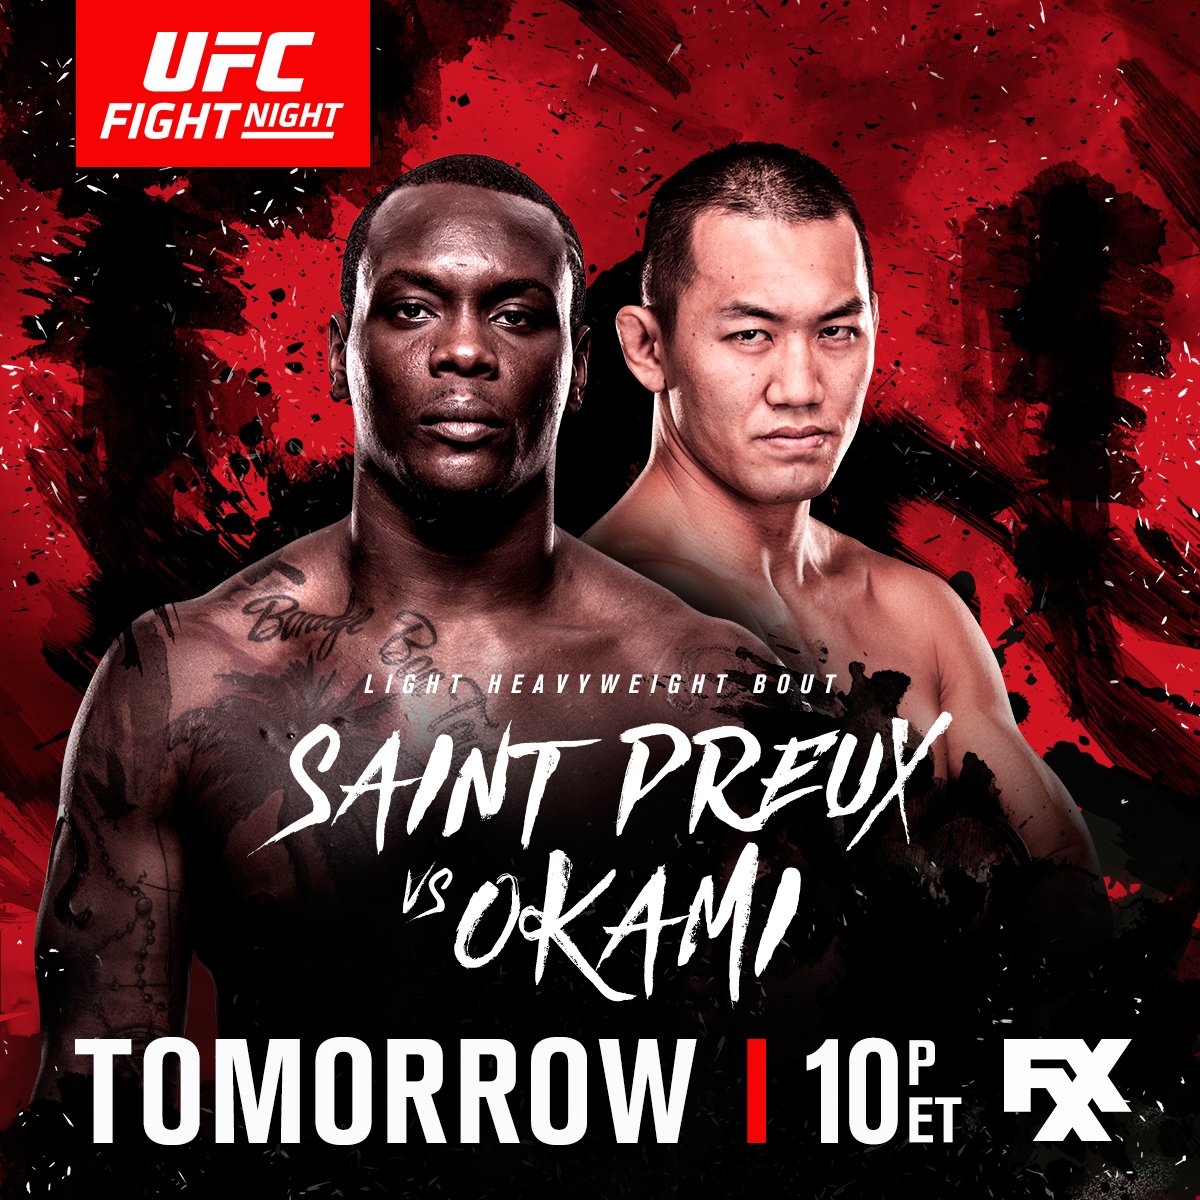 IT GOES DOWN TOMORROW!!

#UFCJapan goes down on @FXXNetwork FRIDAY | 10pmET/7pmPT

Who ya got in the main event: @003_OSP or @OkamiYushin?